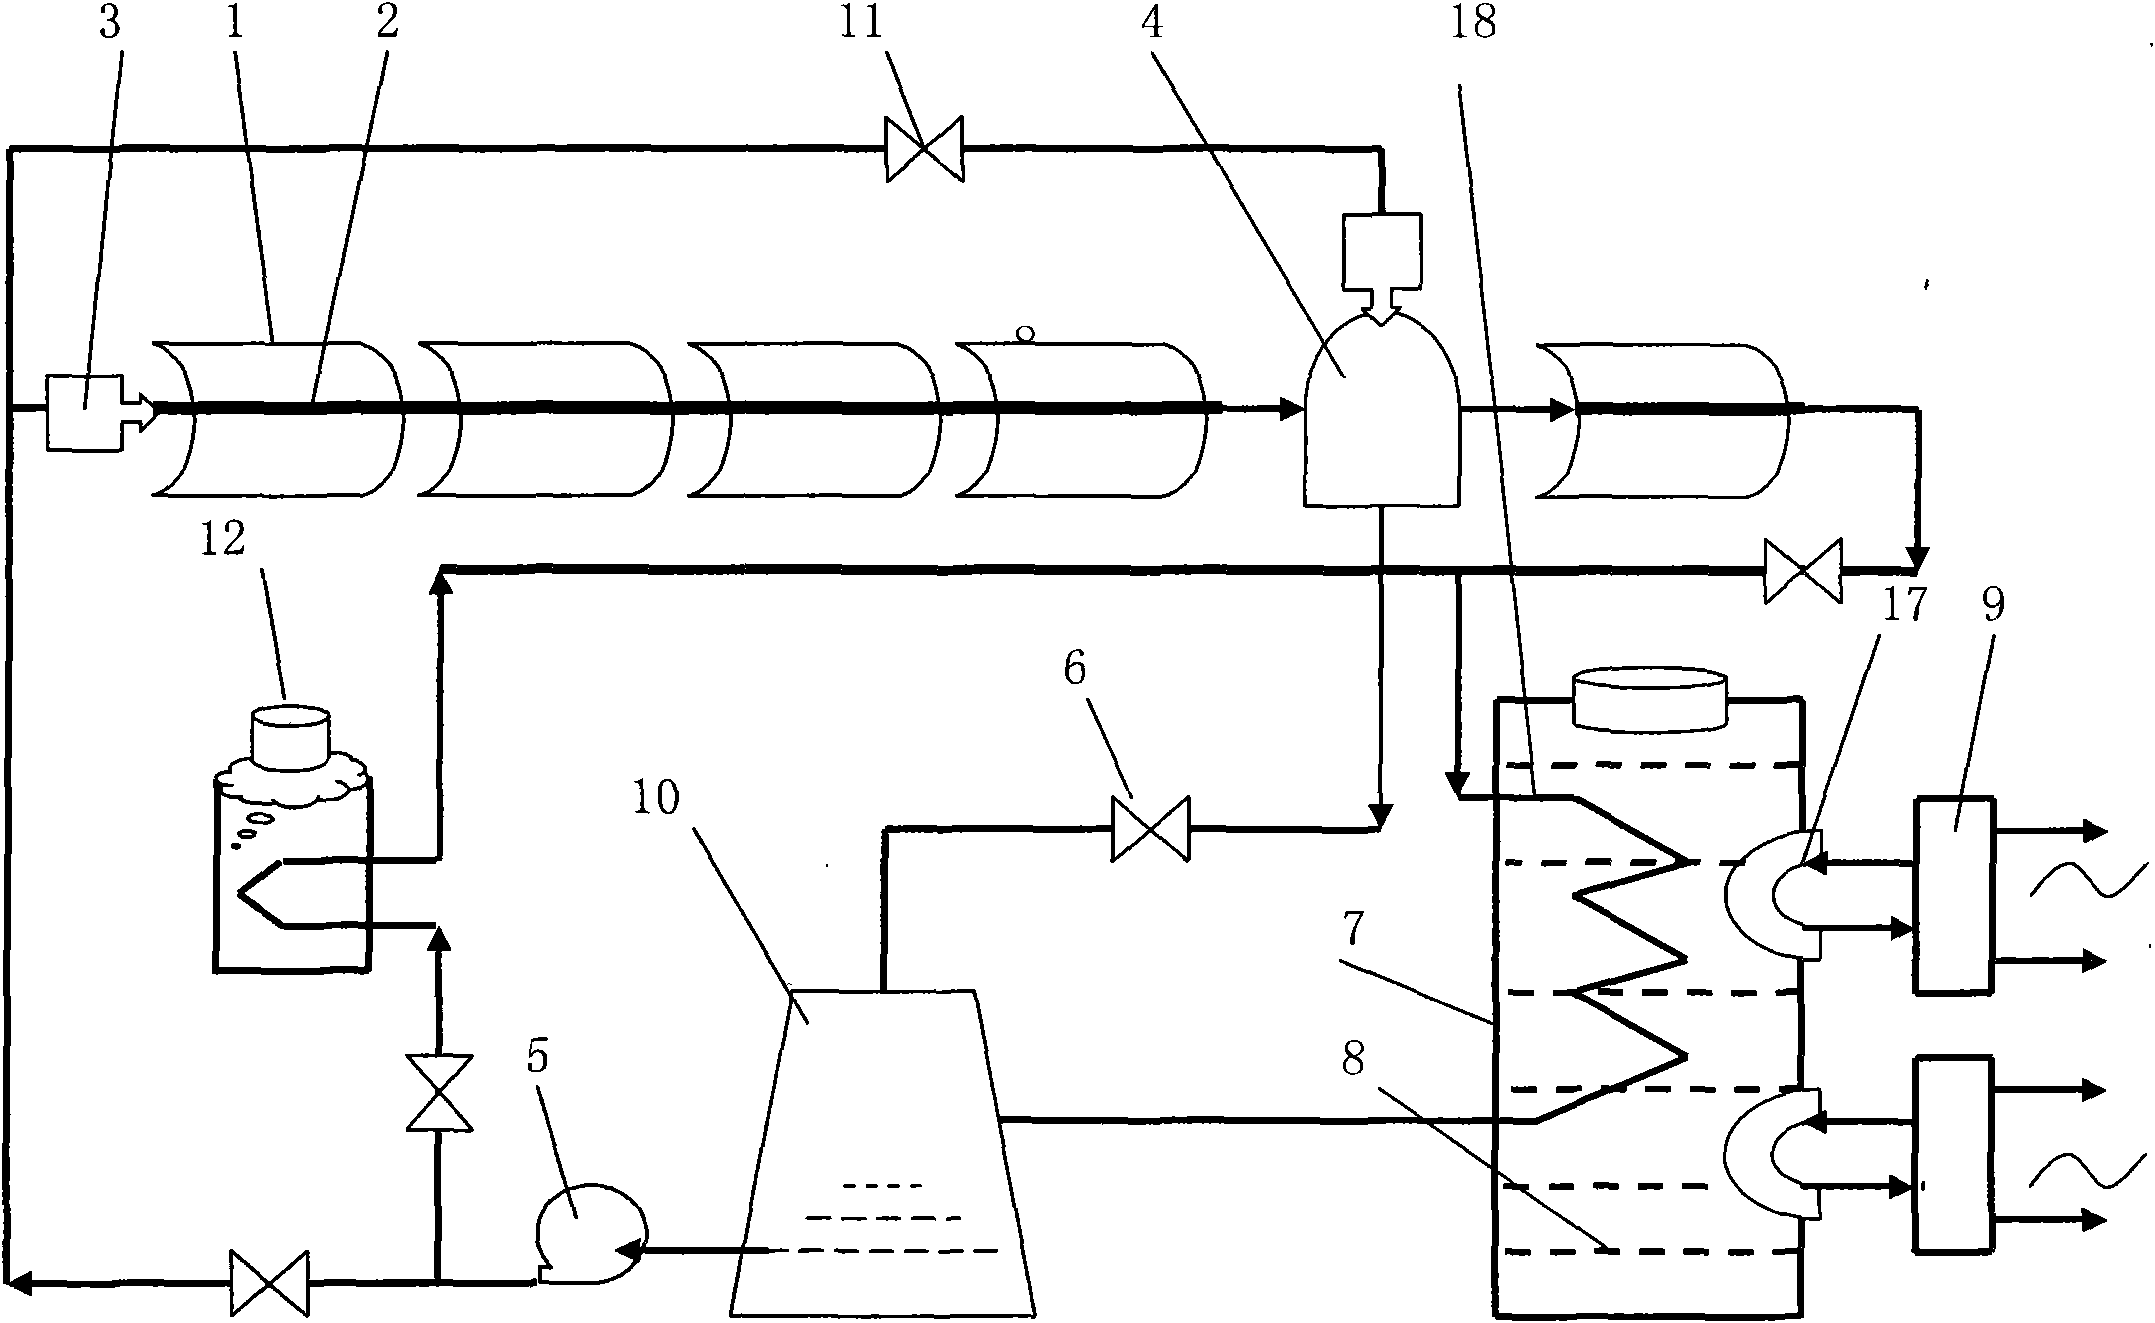 Slotted solar intermediate/low-temperature ORC (organic rankine cycle) thermal power generator